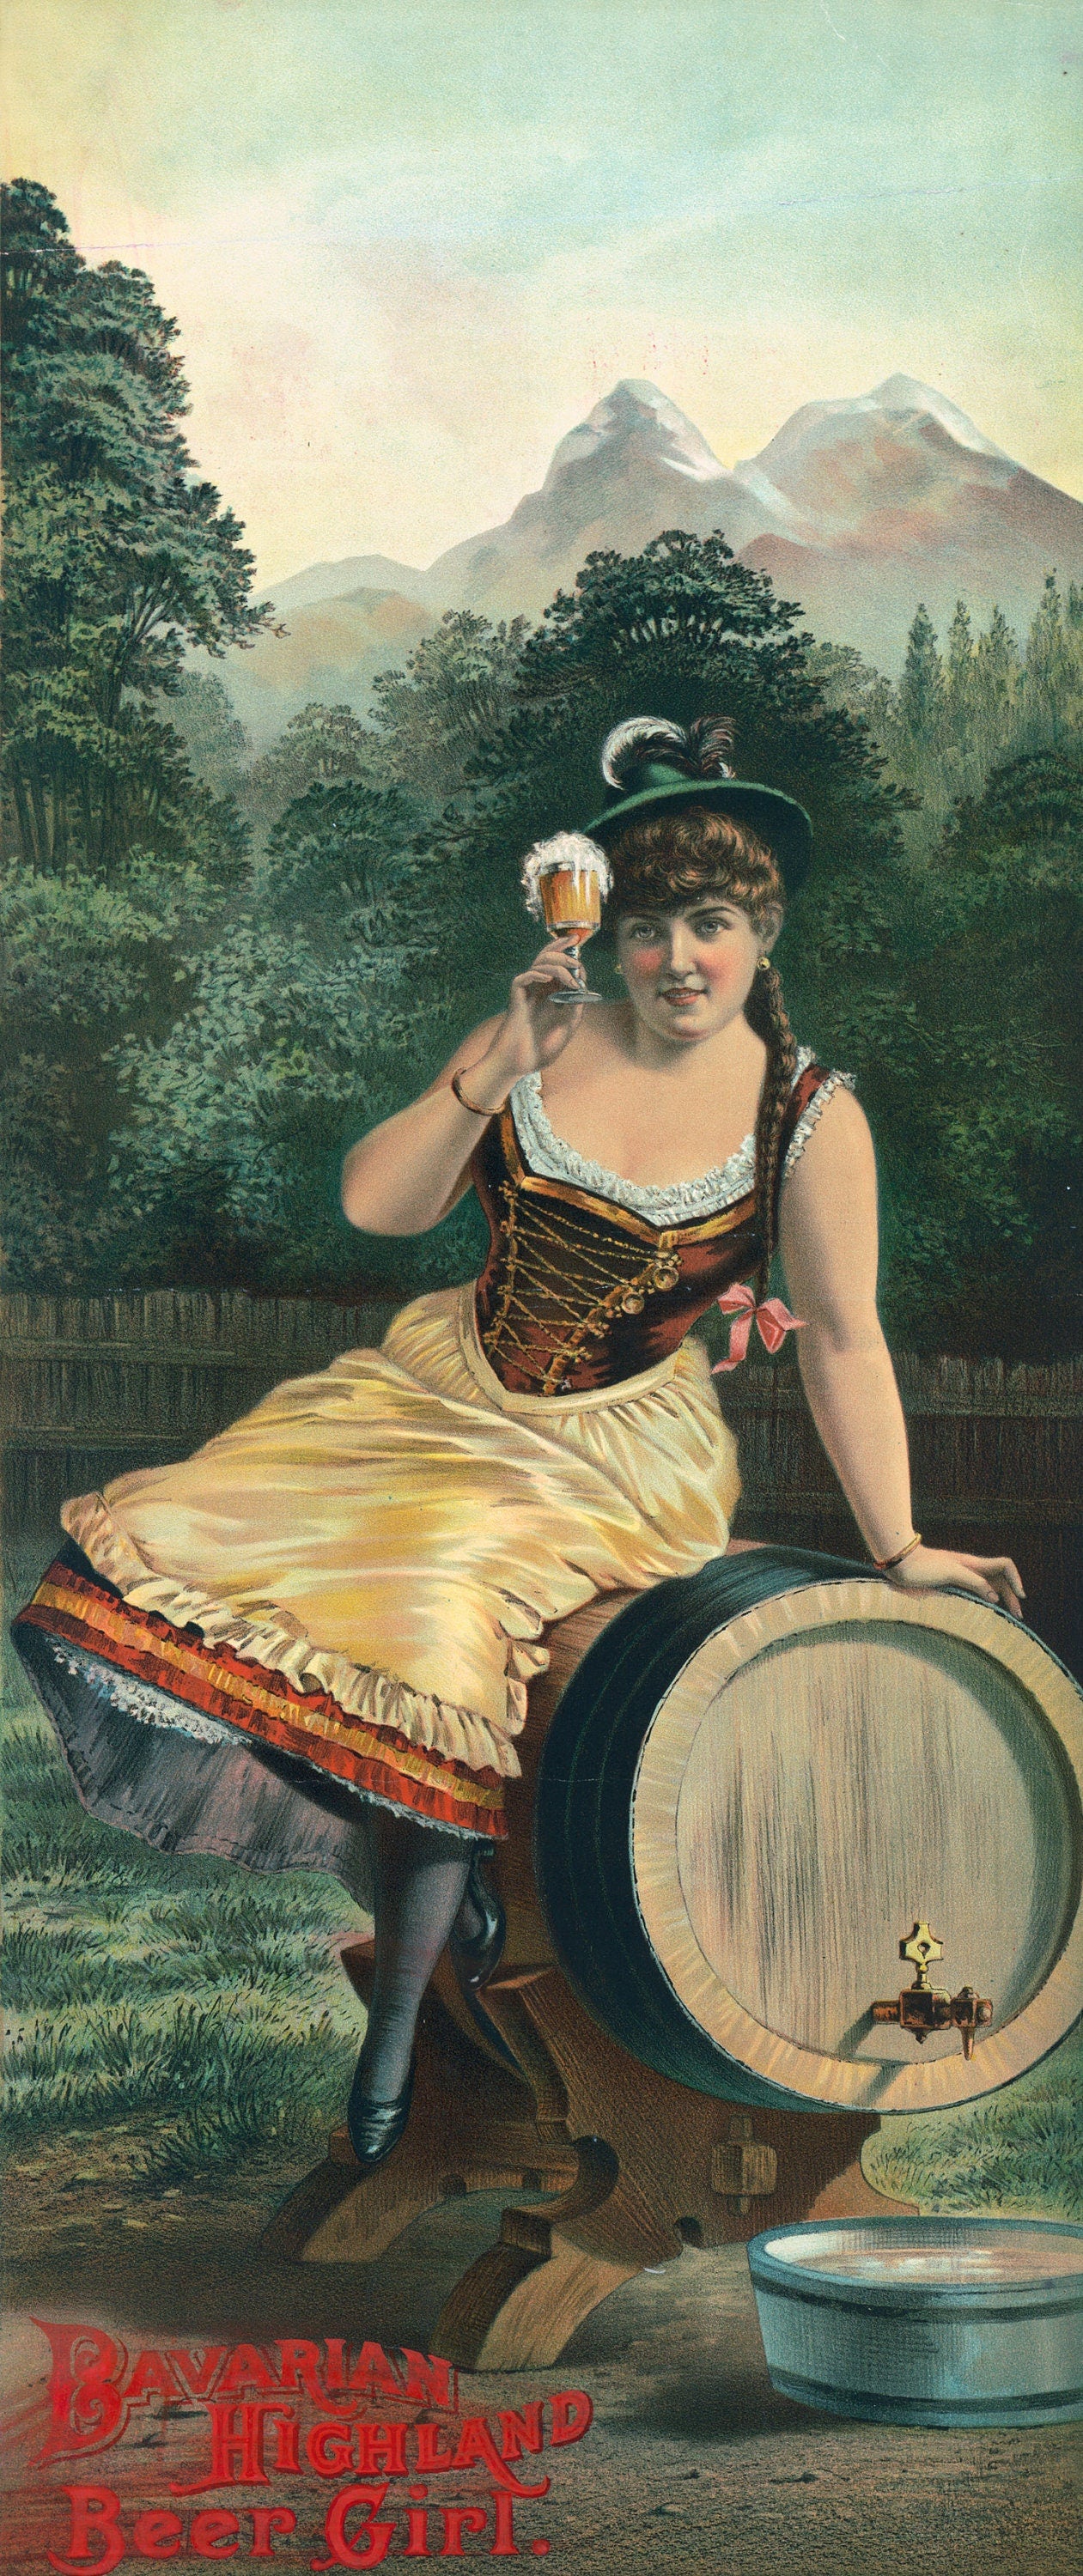 1800s Lithograph Print Advertisements Set 2 Beer Whiskey Brandy [27 Images]